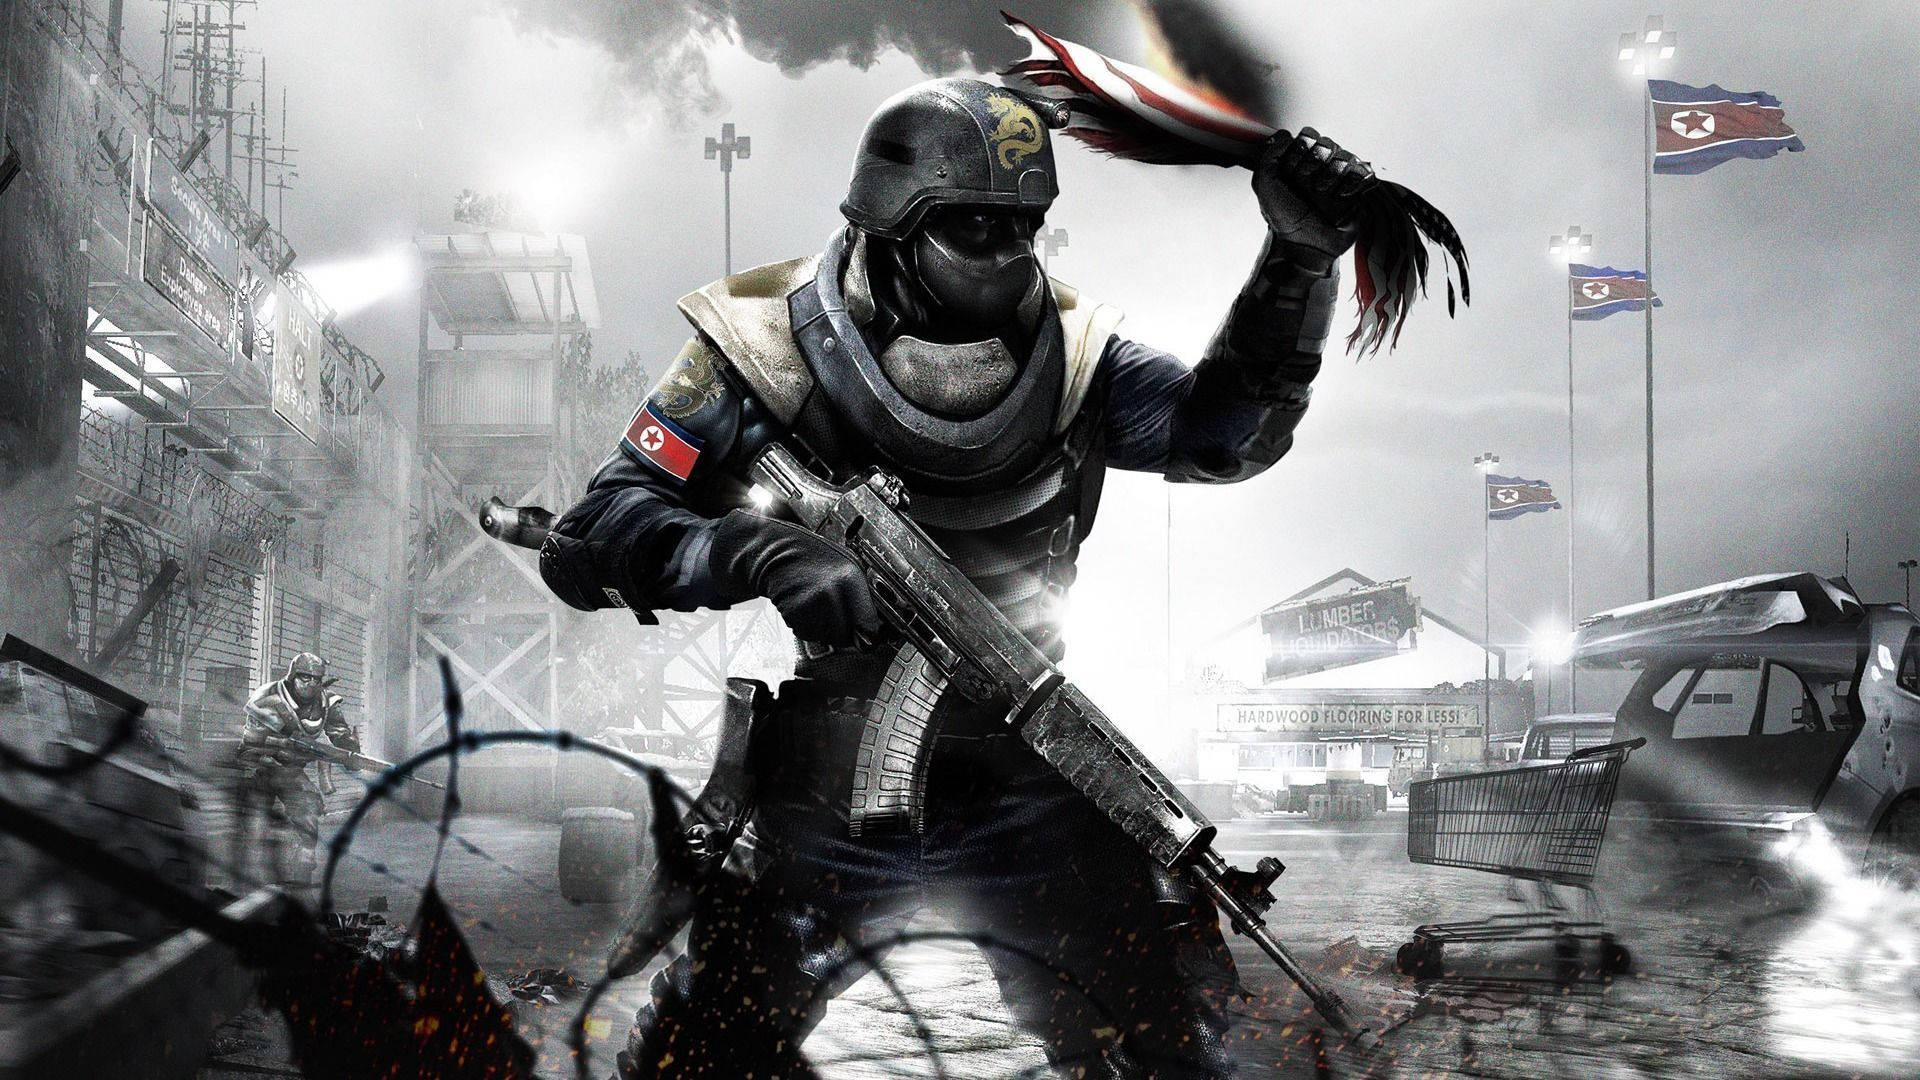 Cool Gaming Homefront Poster Background